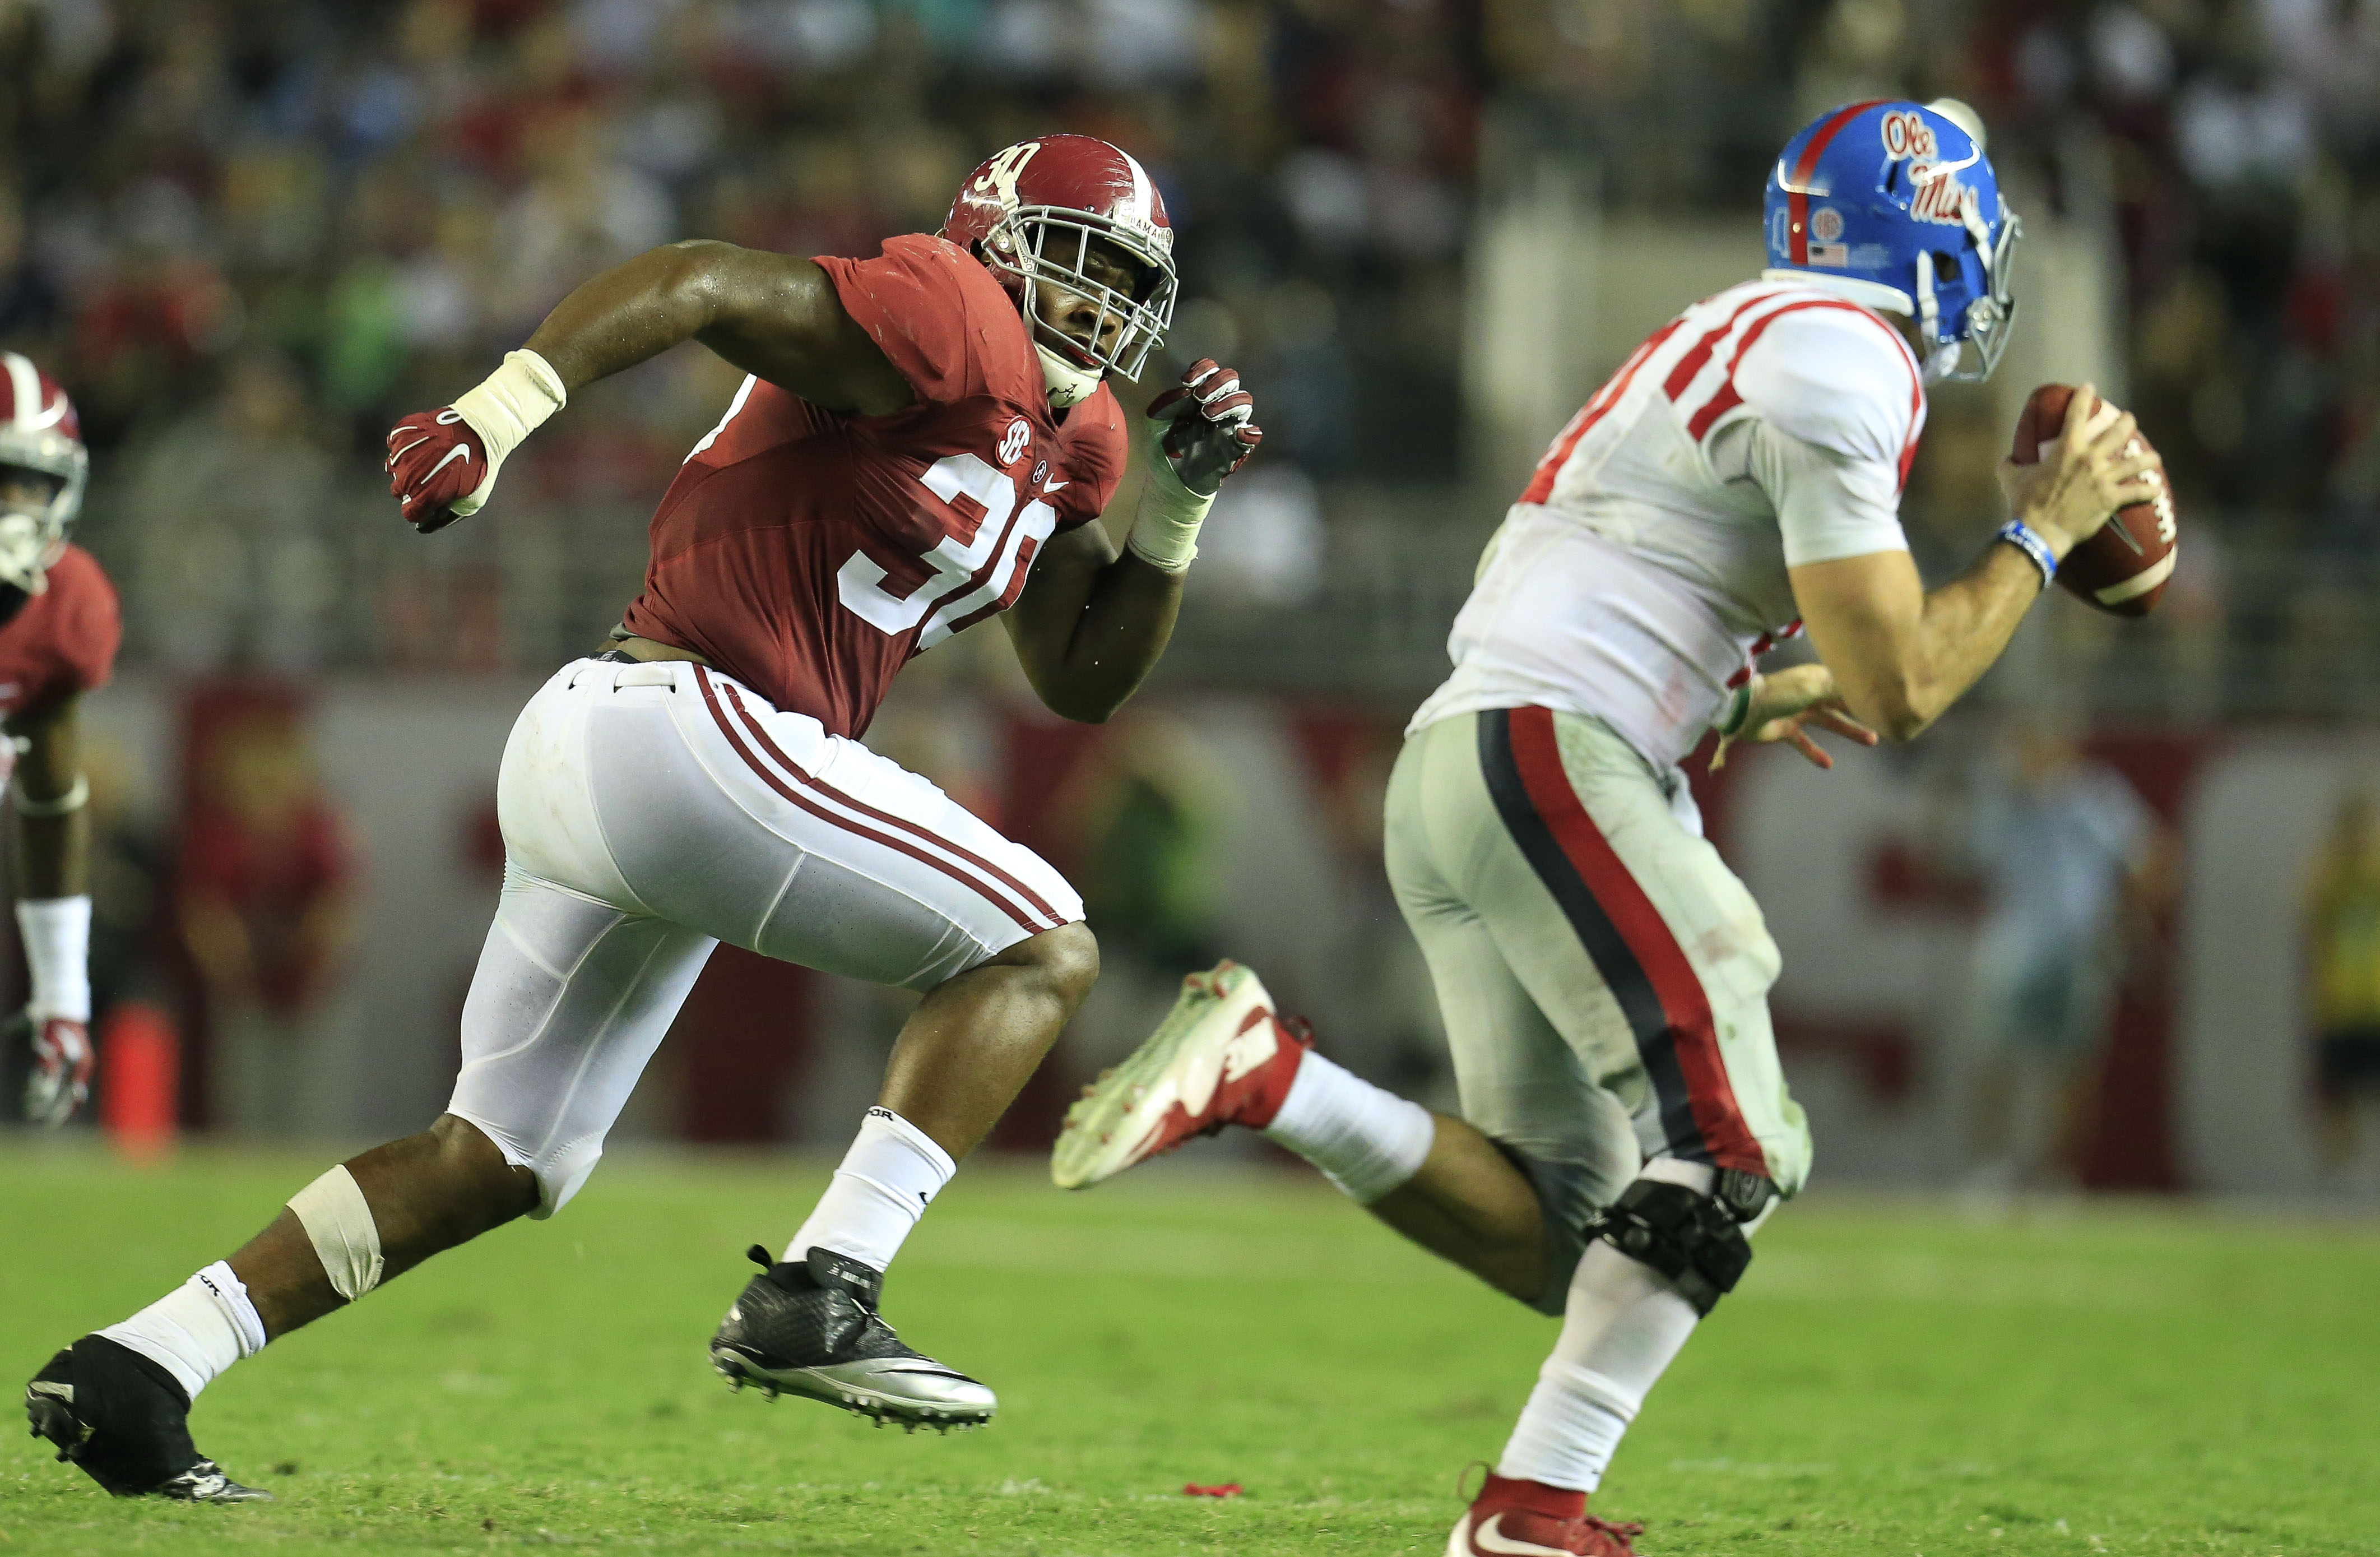 Sep 19, 2015; Tuscaloosa, AL, USA; Alabama Crimson Tide linebacker Denzel Devall (30) chases down Mississippi Rebels quarterback Chad Kelly (10) at Bryant-Denny Stadium. The Rebels defeated the Tide 43-37. Mandatory Credit: Marvin Gentry-USA TODAY Sports